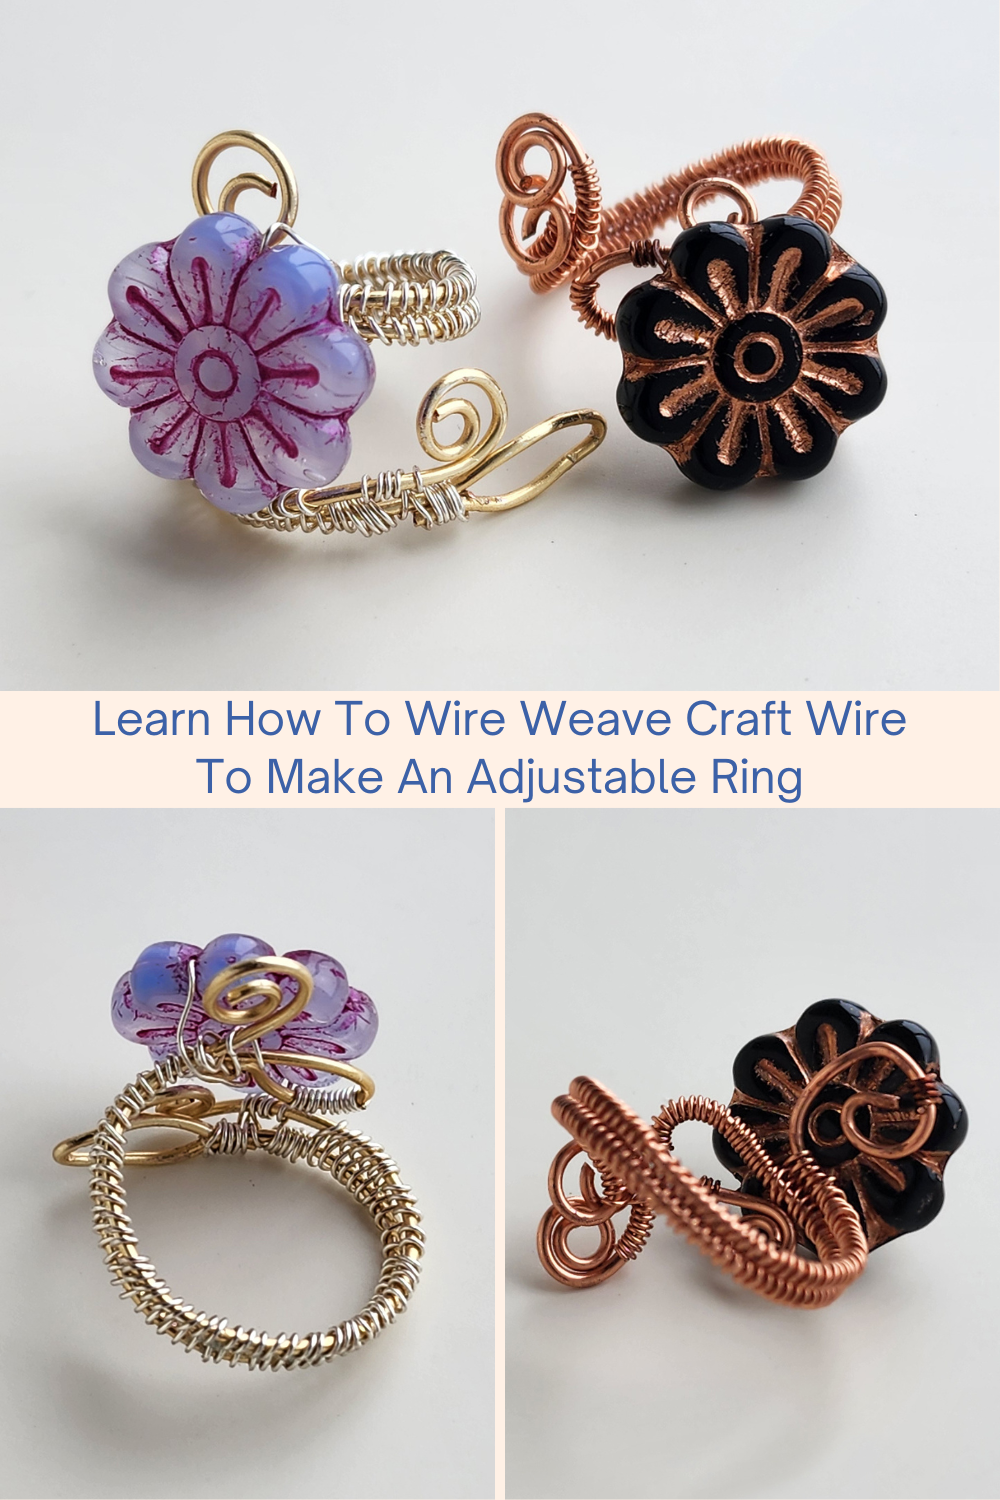 Learn How To Wire Weave Craft Wire To Make An Adjustable Ring Collage